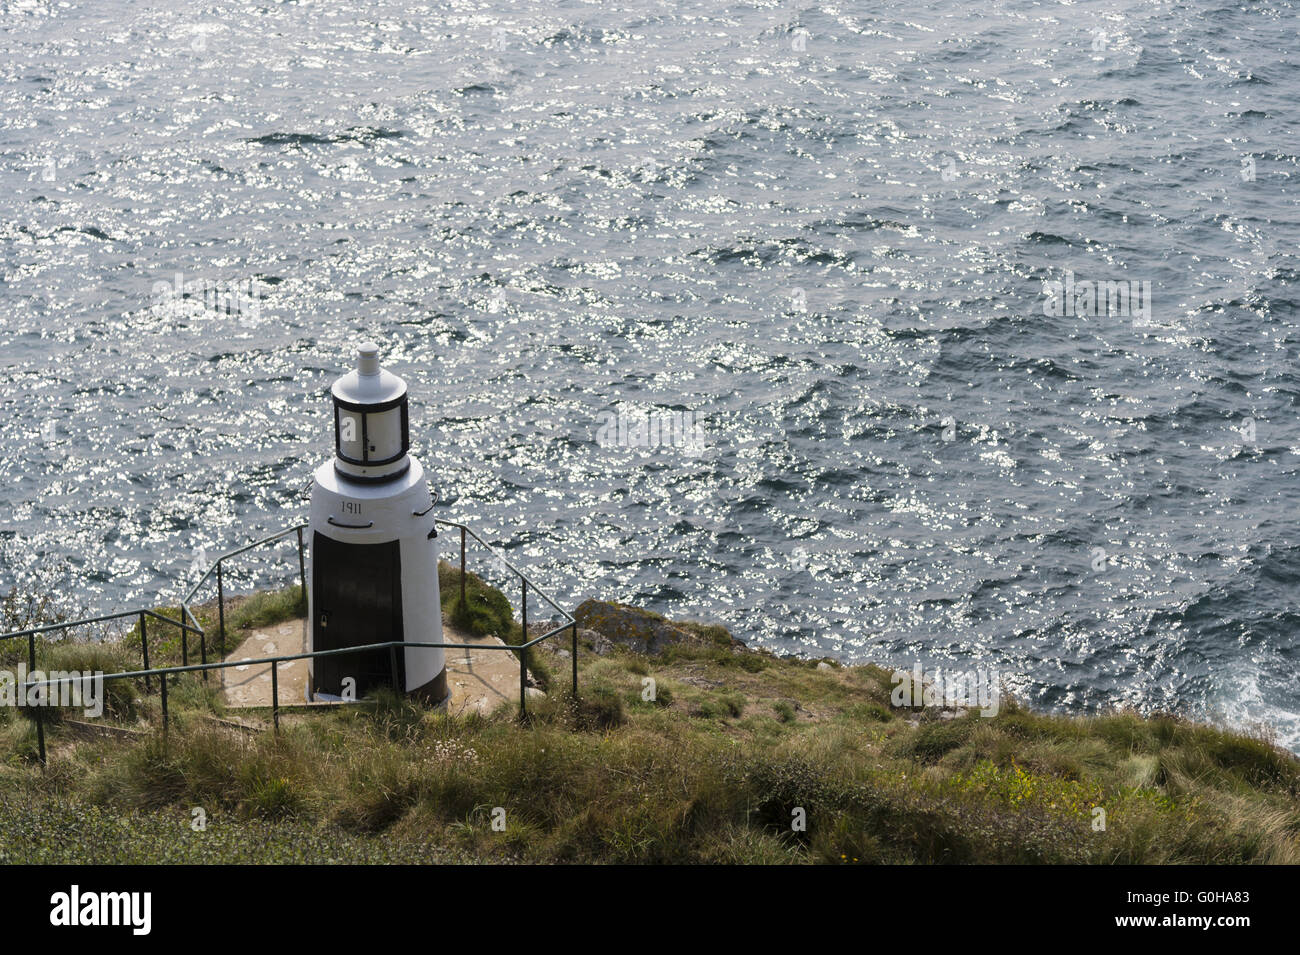 A beacon on the coast of the English Channel Stock Photo